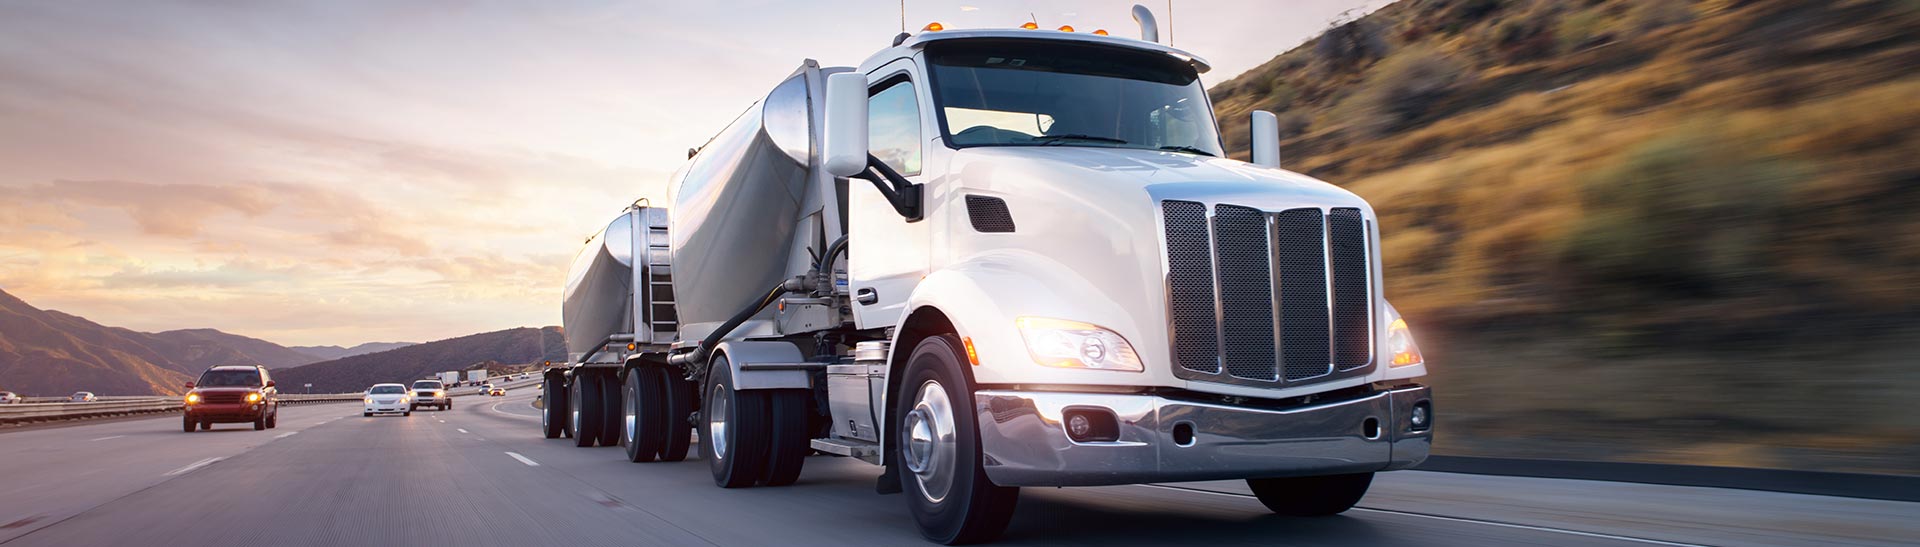 Memphis Trucking Service, Freight Forwarding Services and Logistics Services